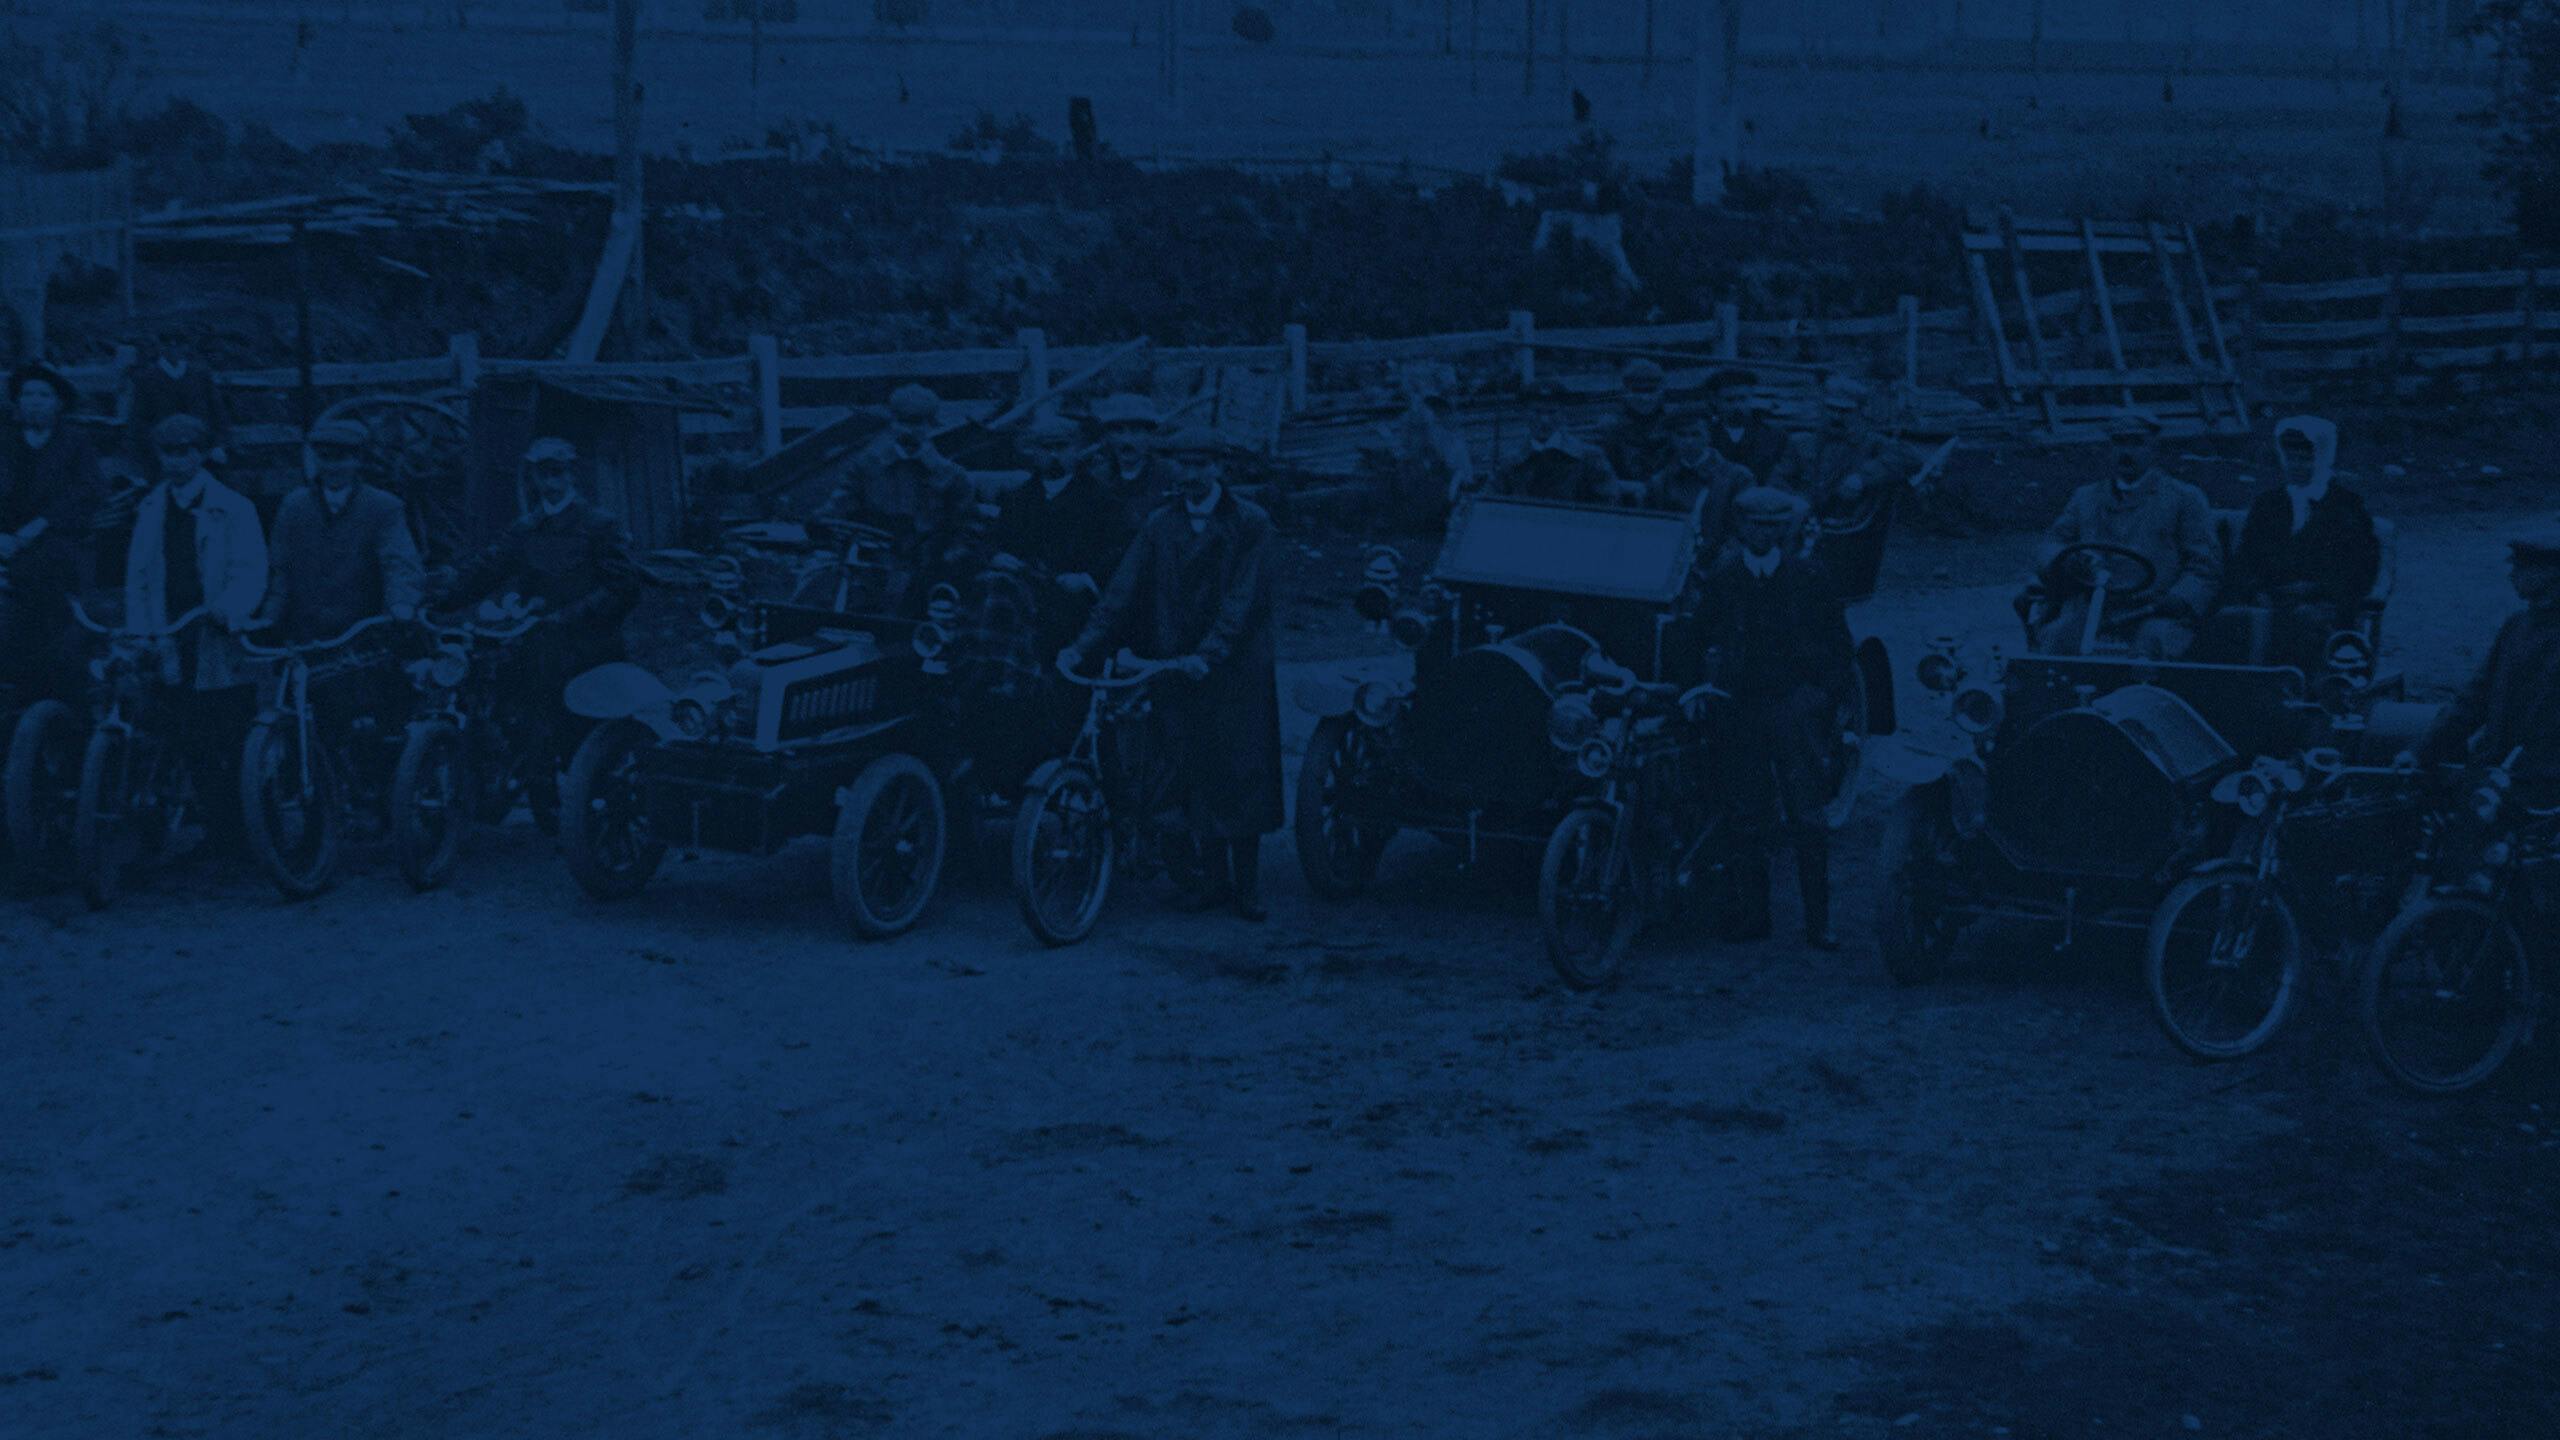 Vintage image with cars and motorbikes lined up